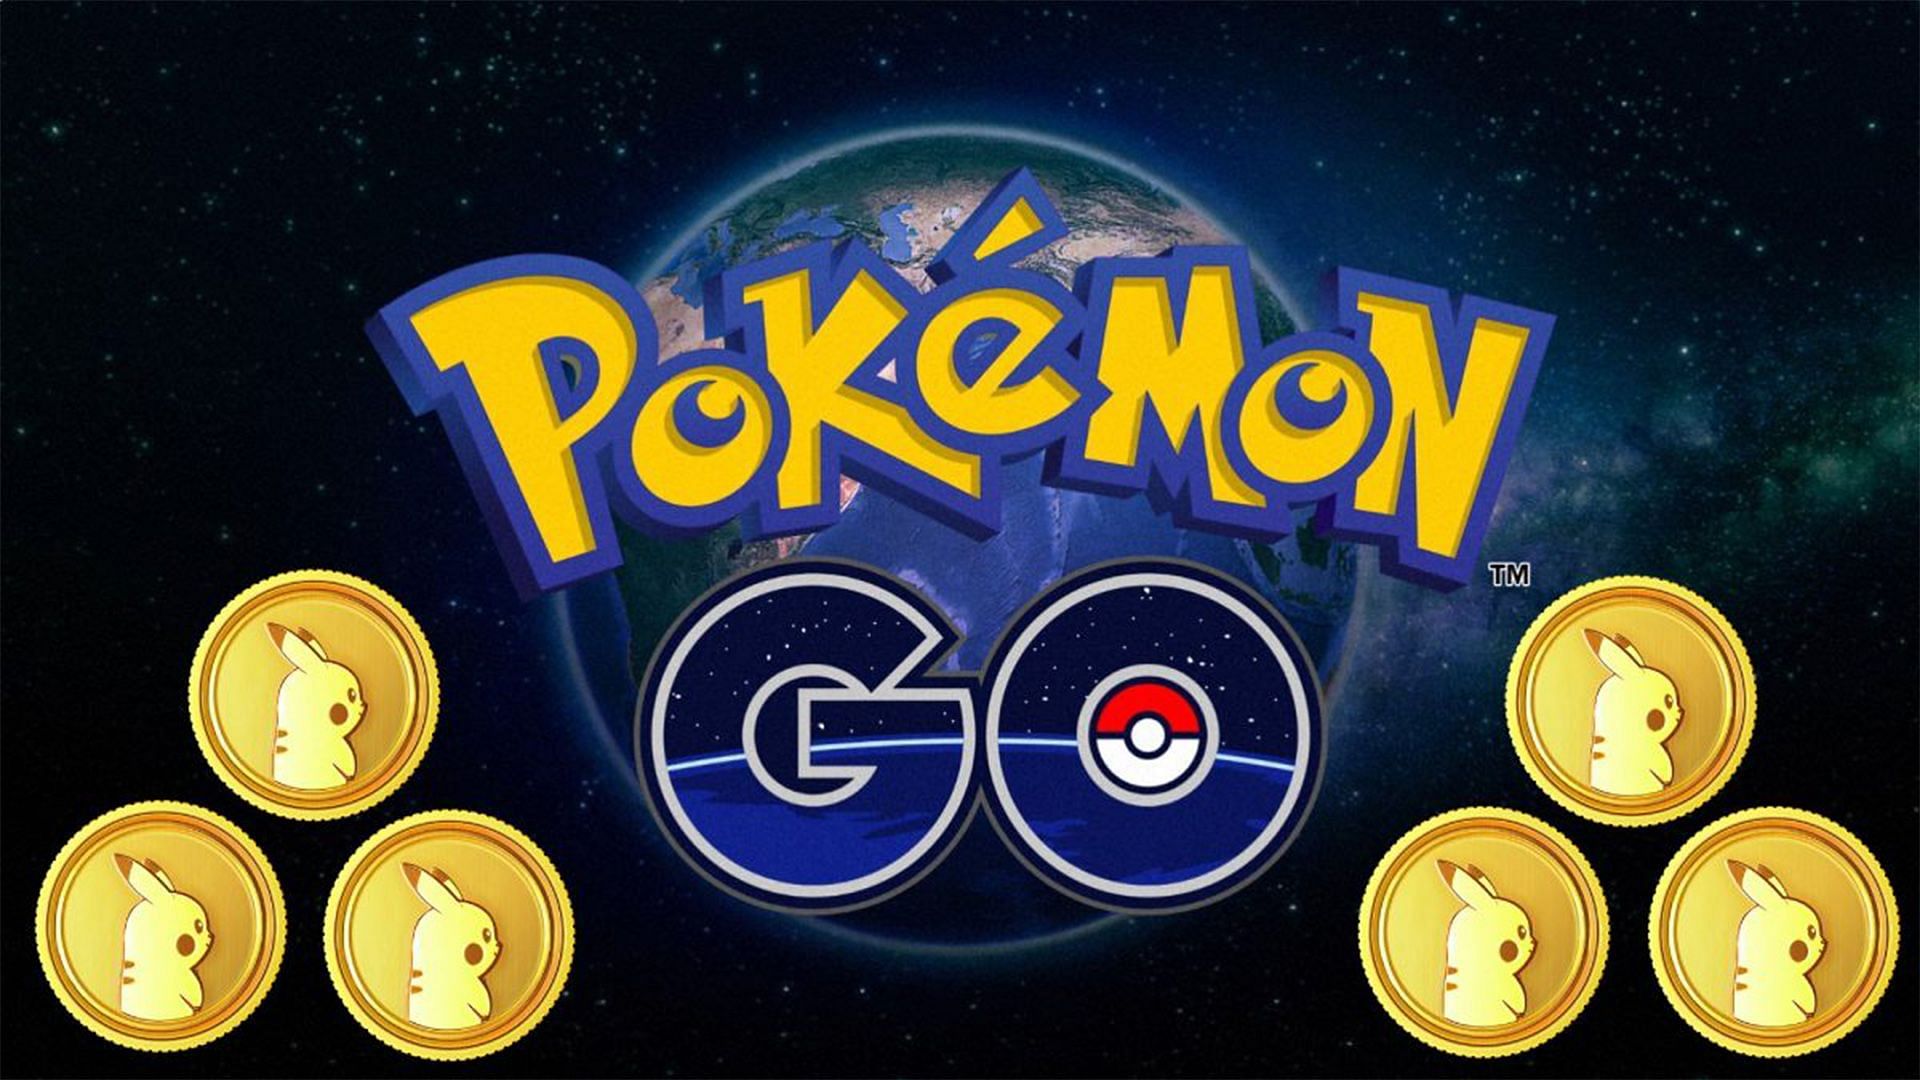 PokeCoins as they appear to be in the game (Image via Niantic)